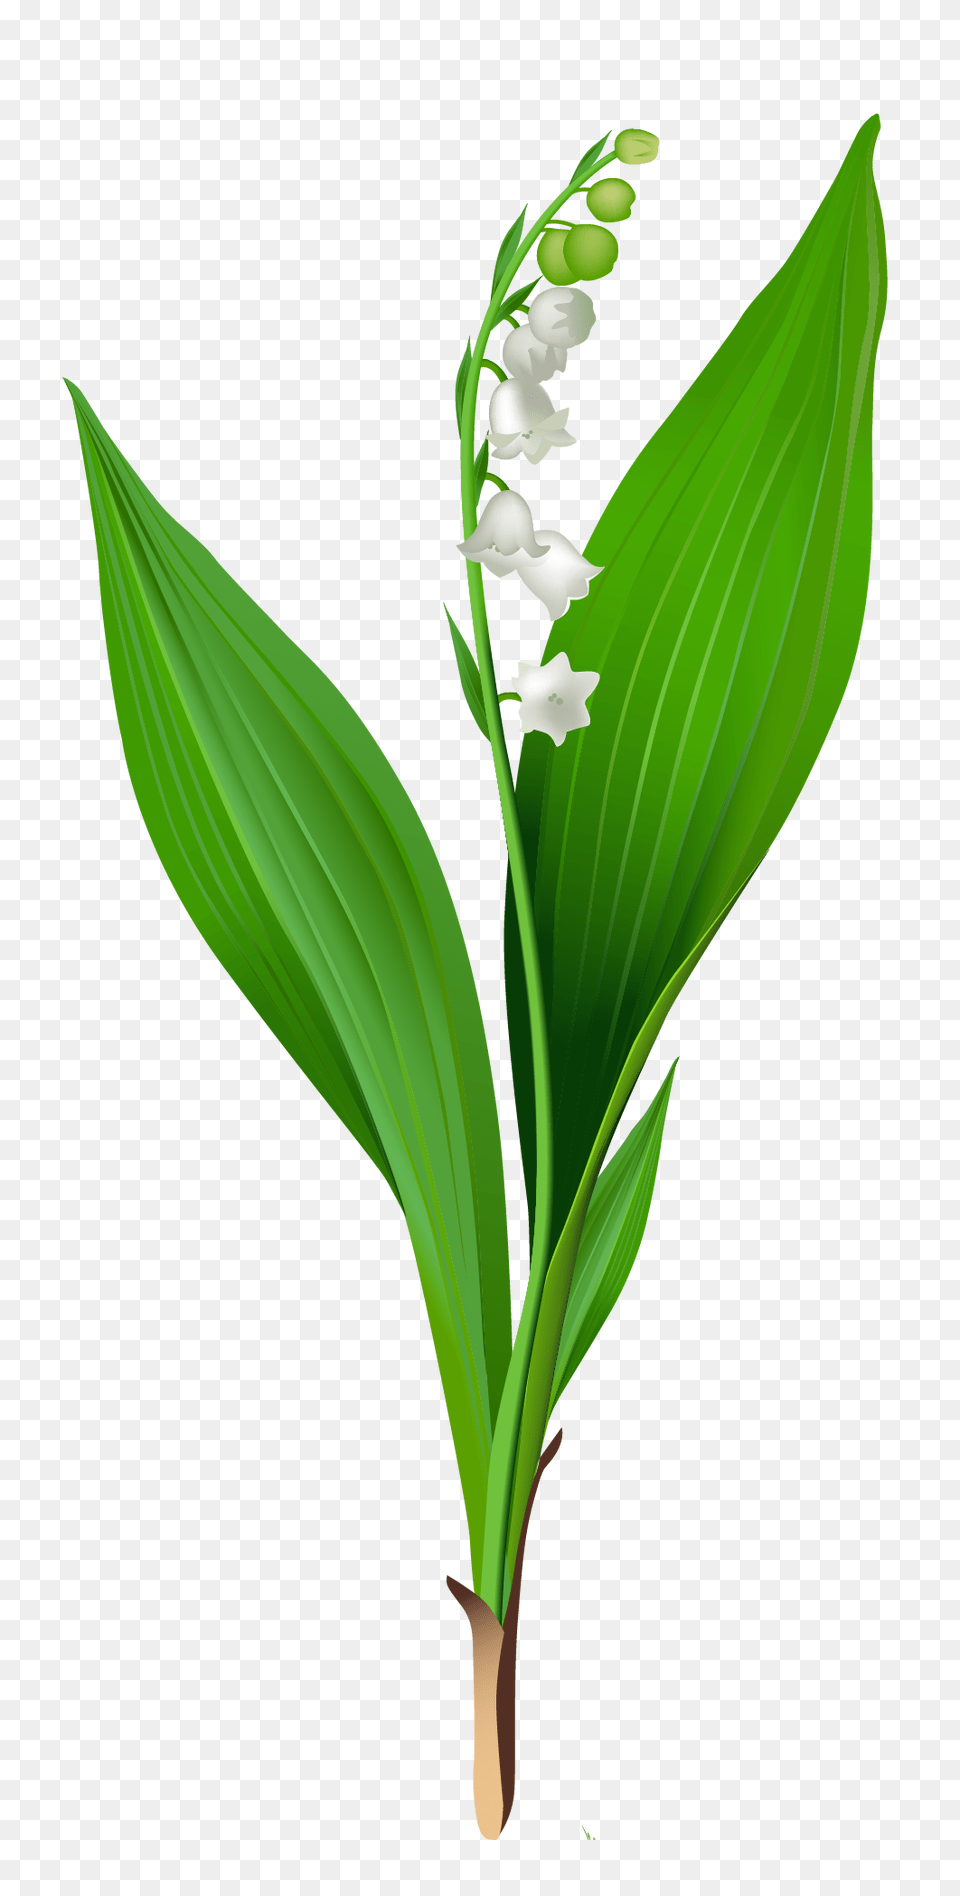 Spring Lily Of The Valley, Flower, Leaf, Plant, Amaryllidaceae Png Image